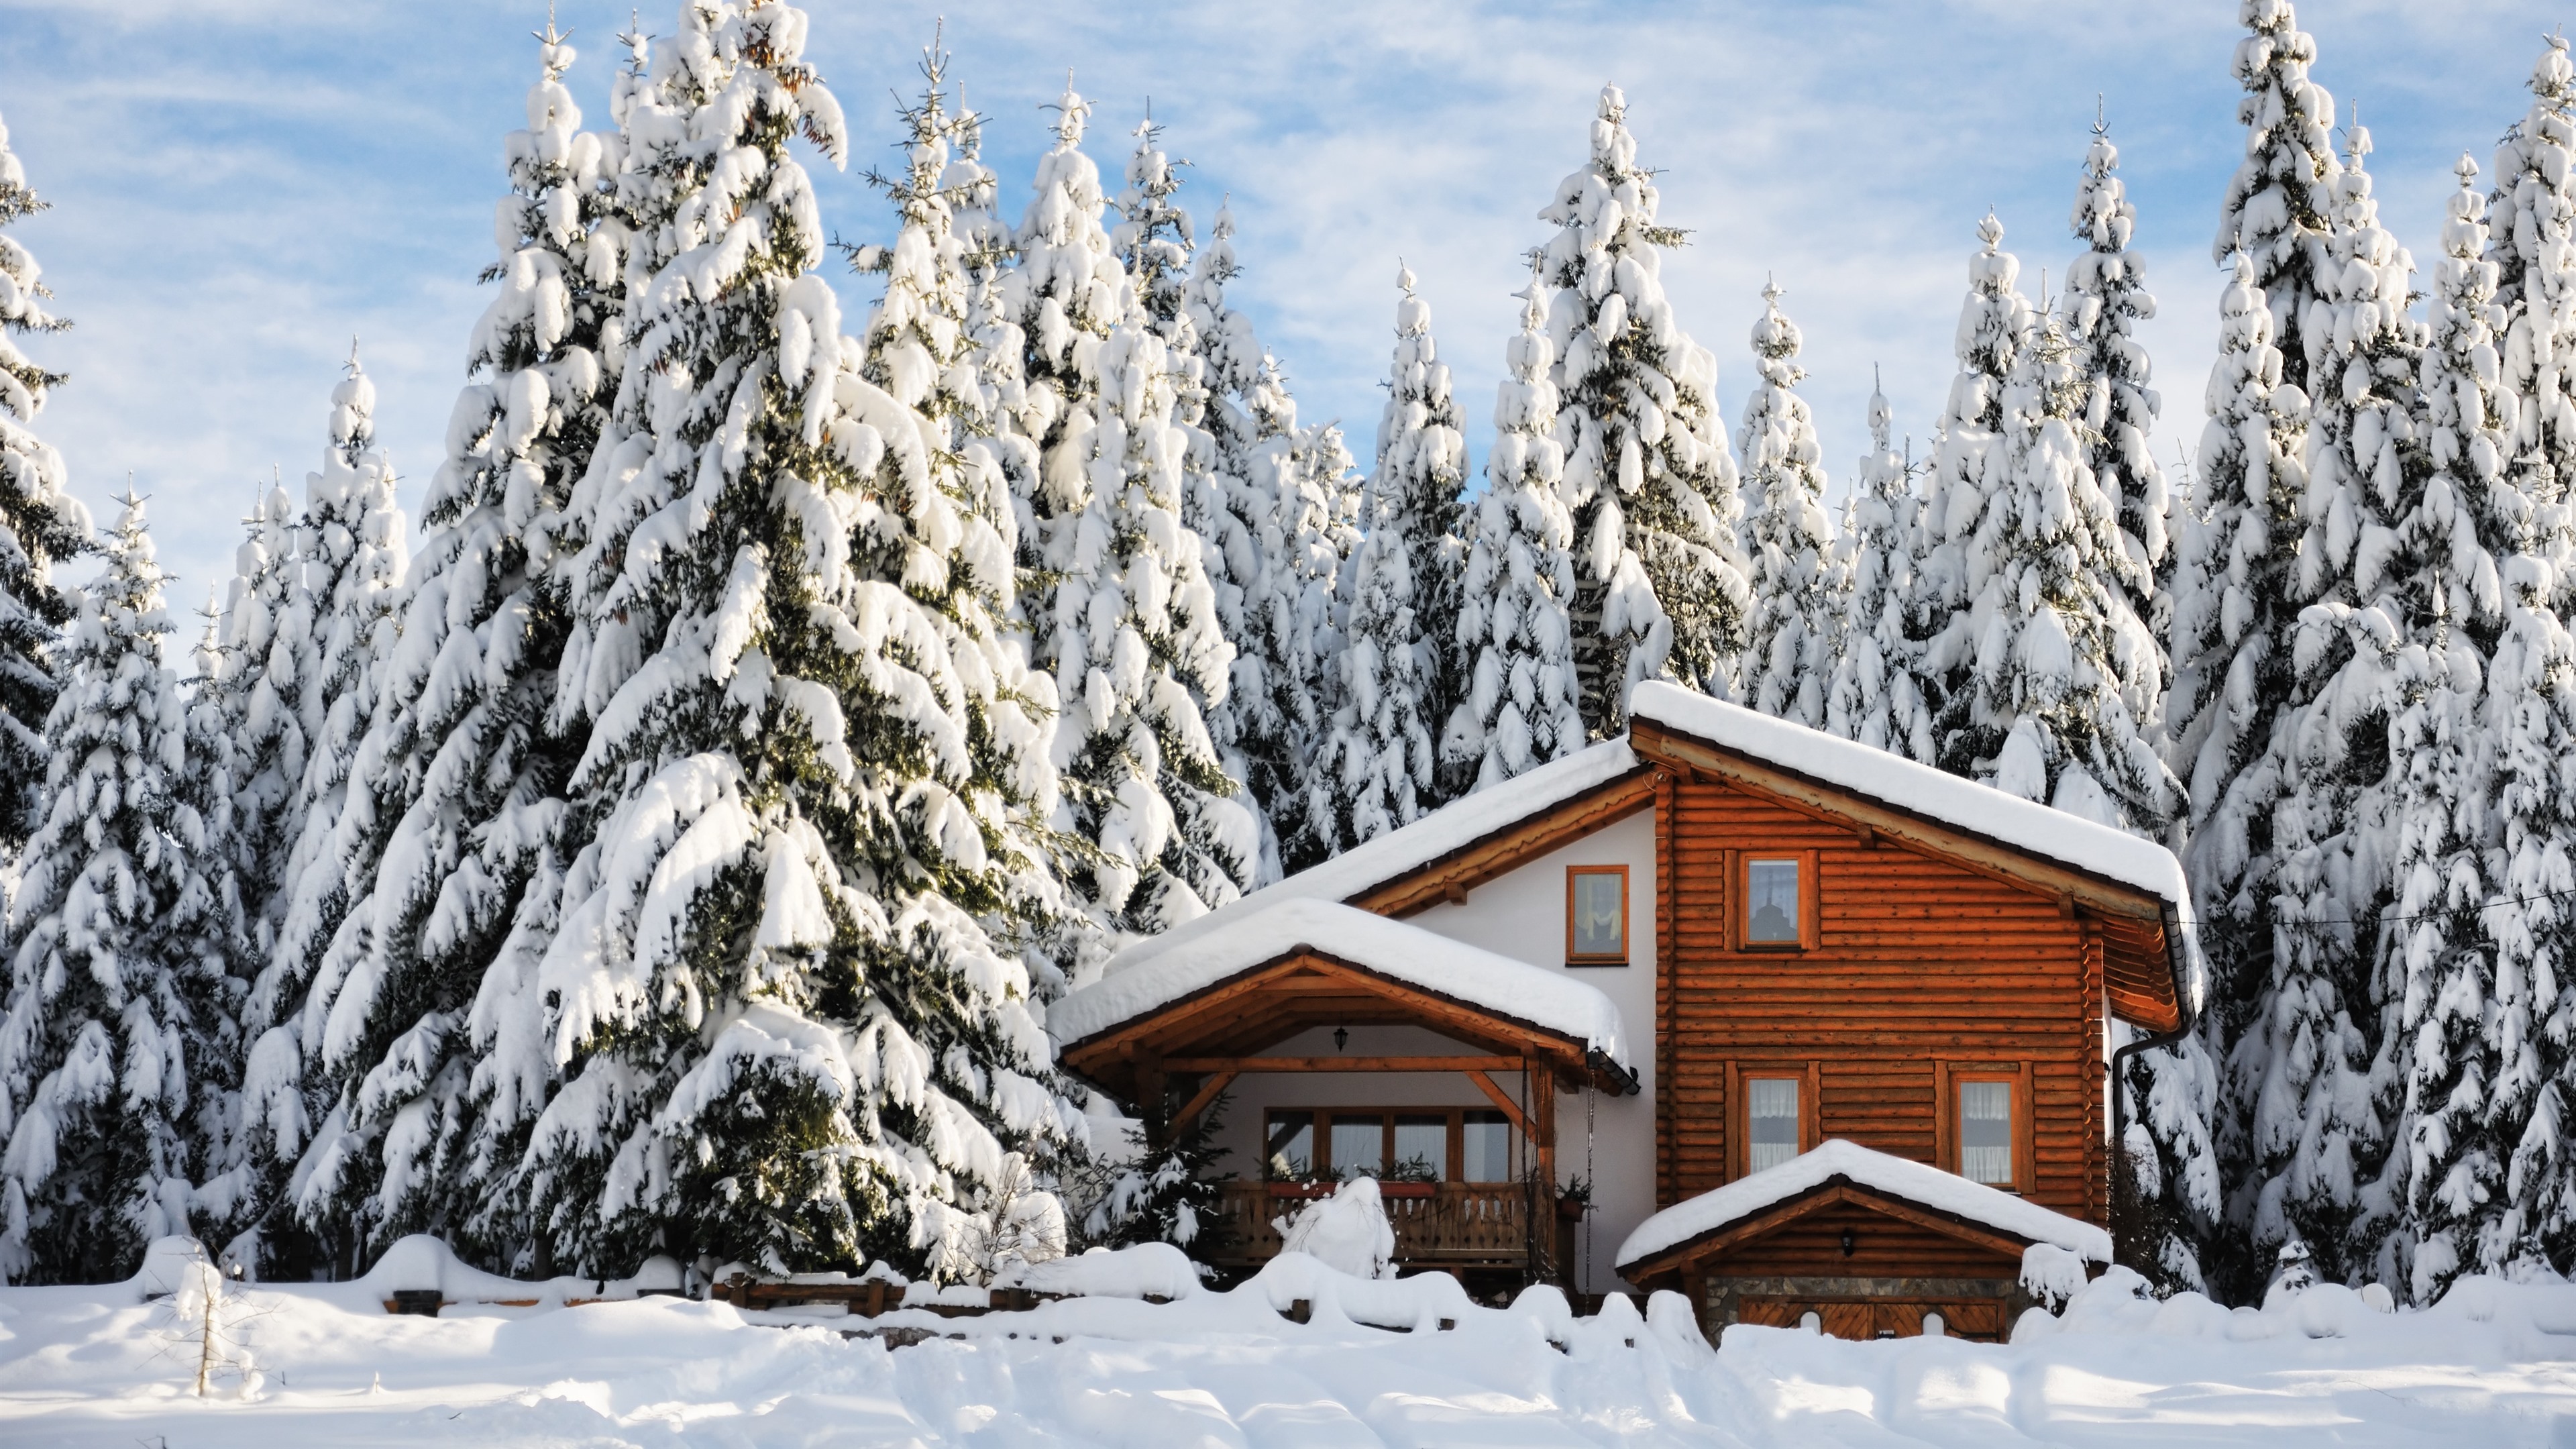 Wallpaper Winter, wood house, thick snow, trees 3840x2160 UHD 4K Picture, Image